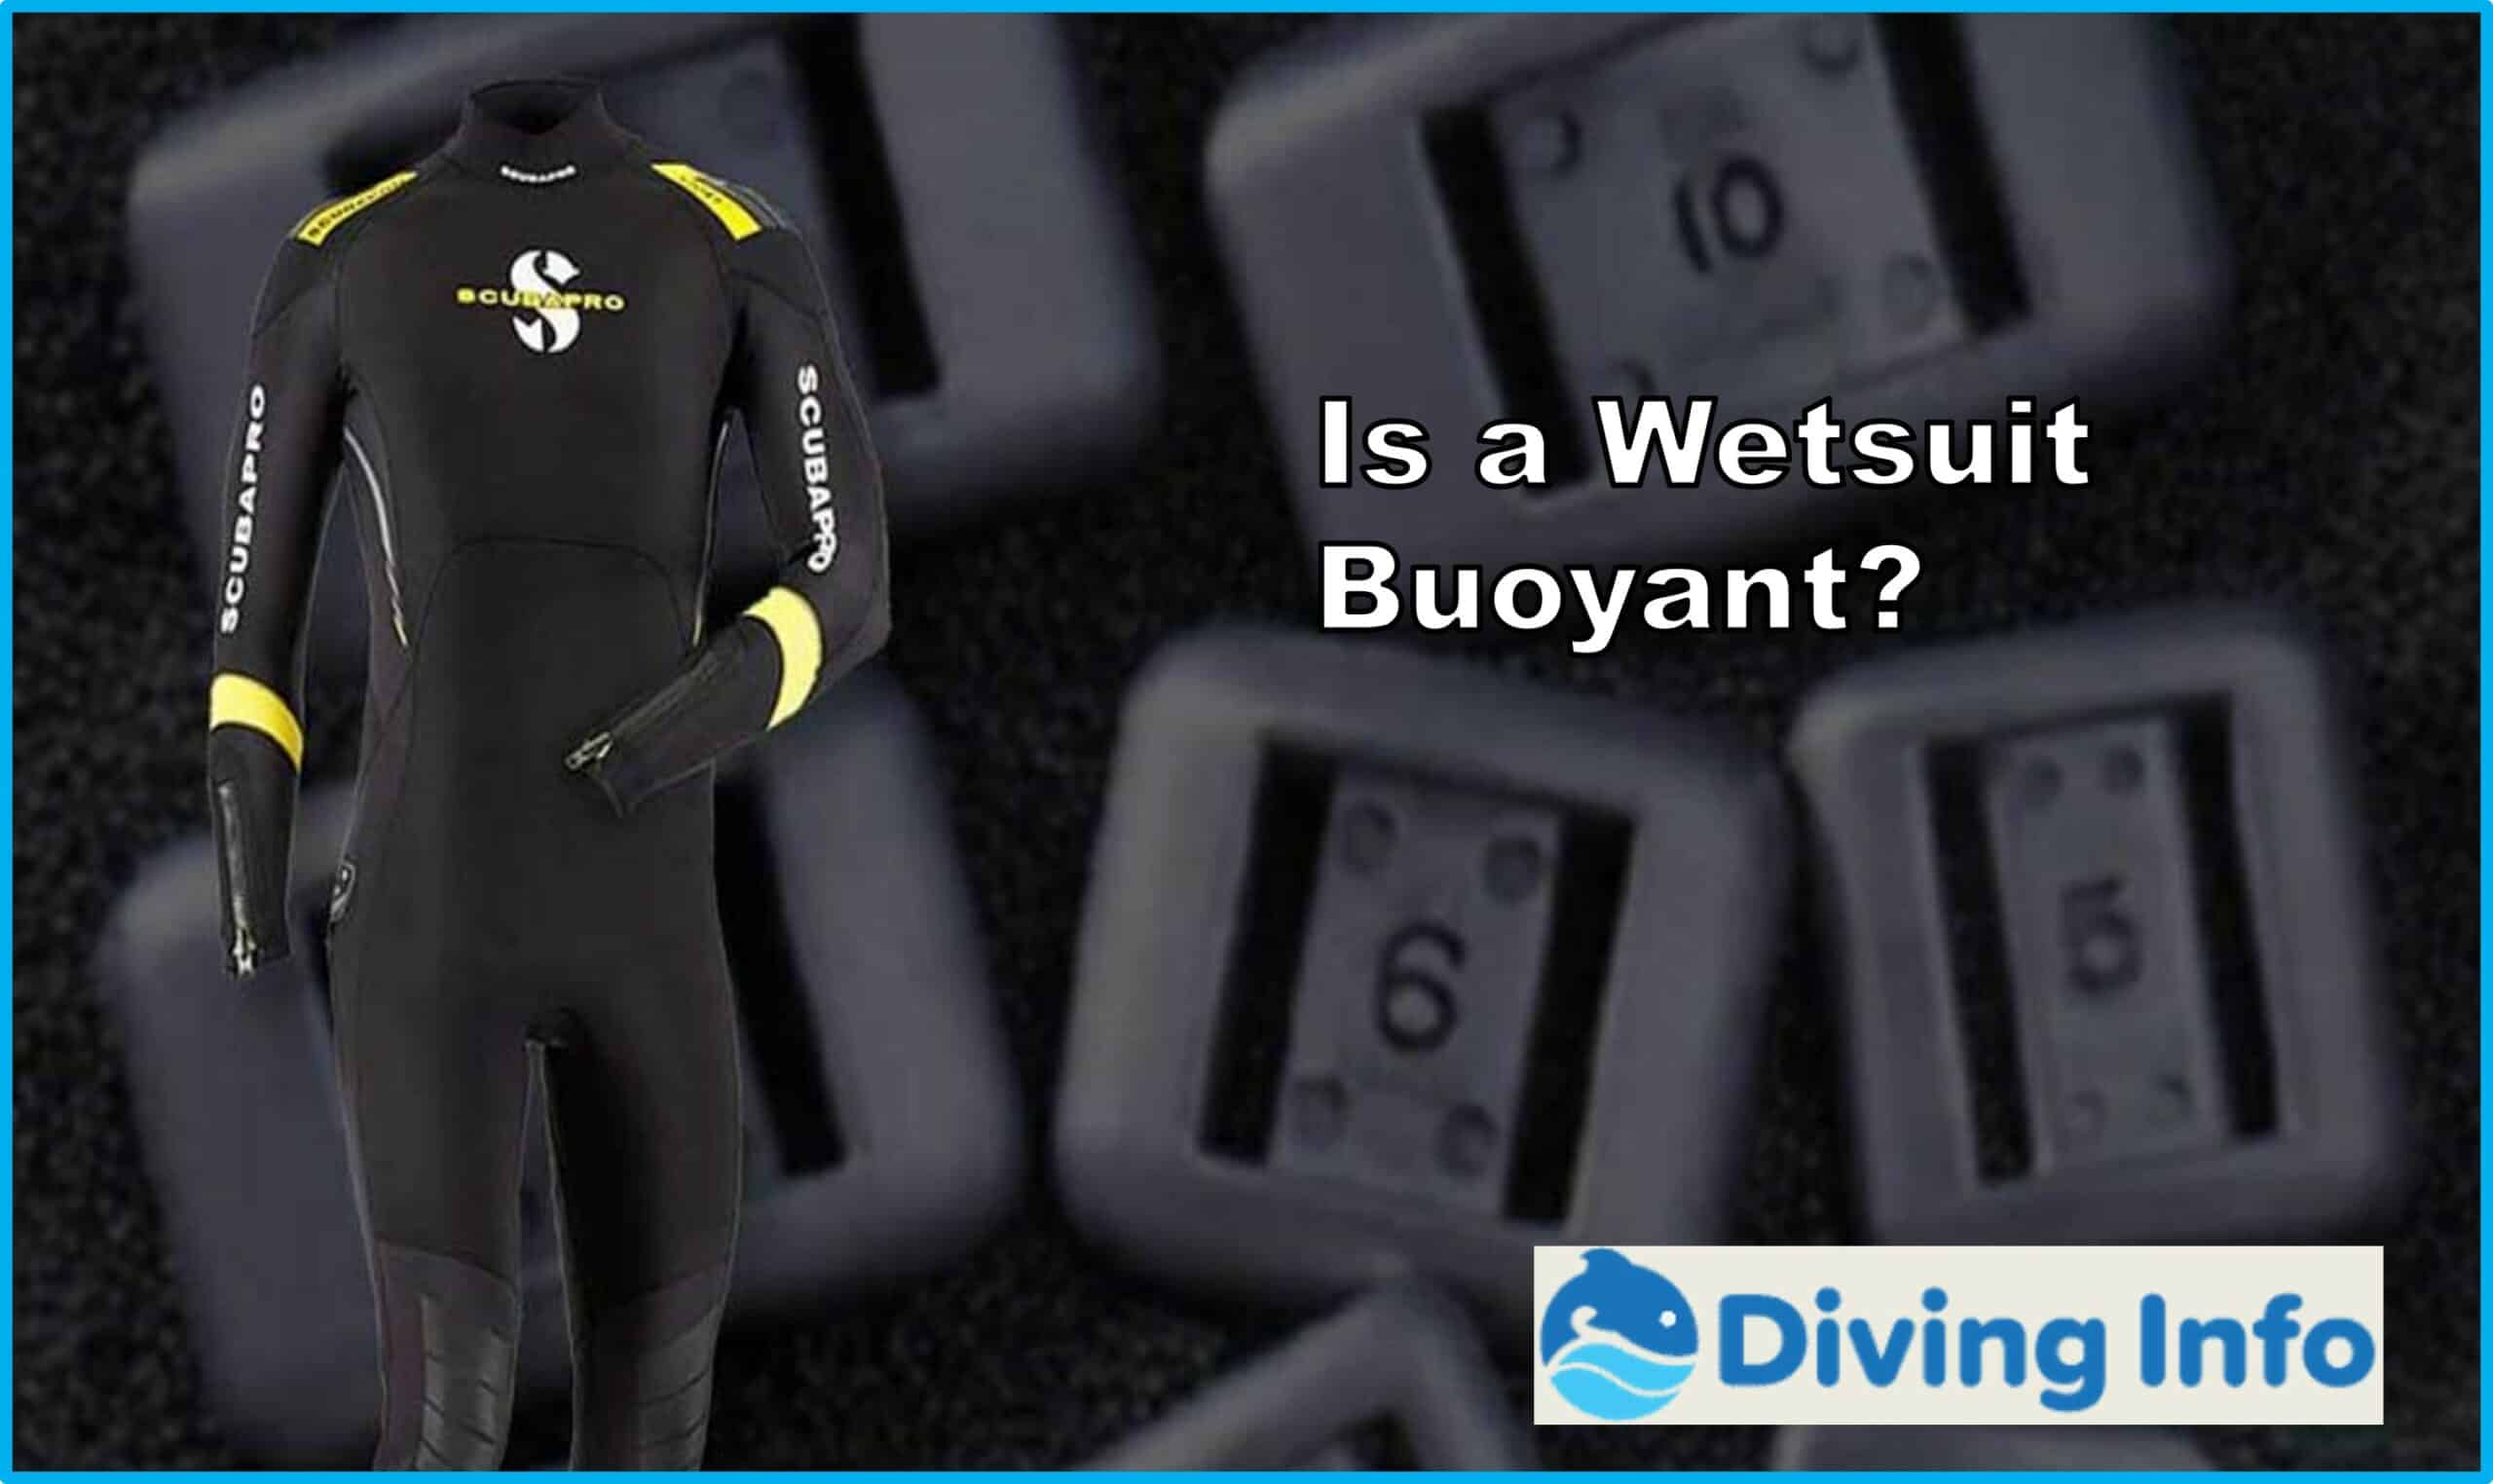 Is a Wetsuit Buoyant?